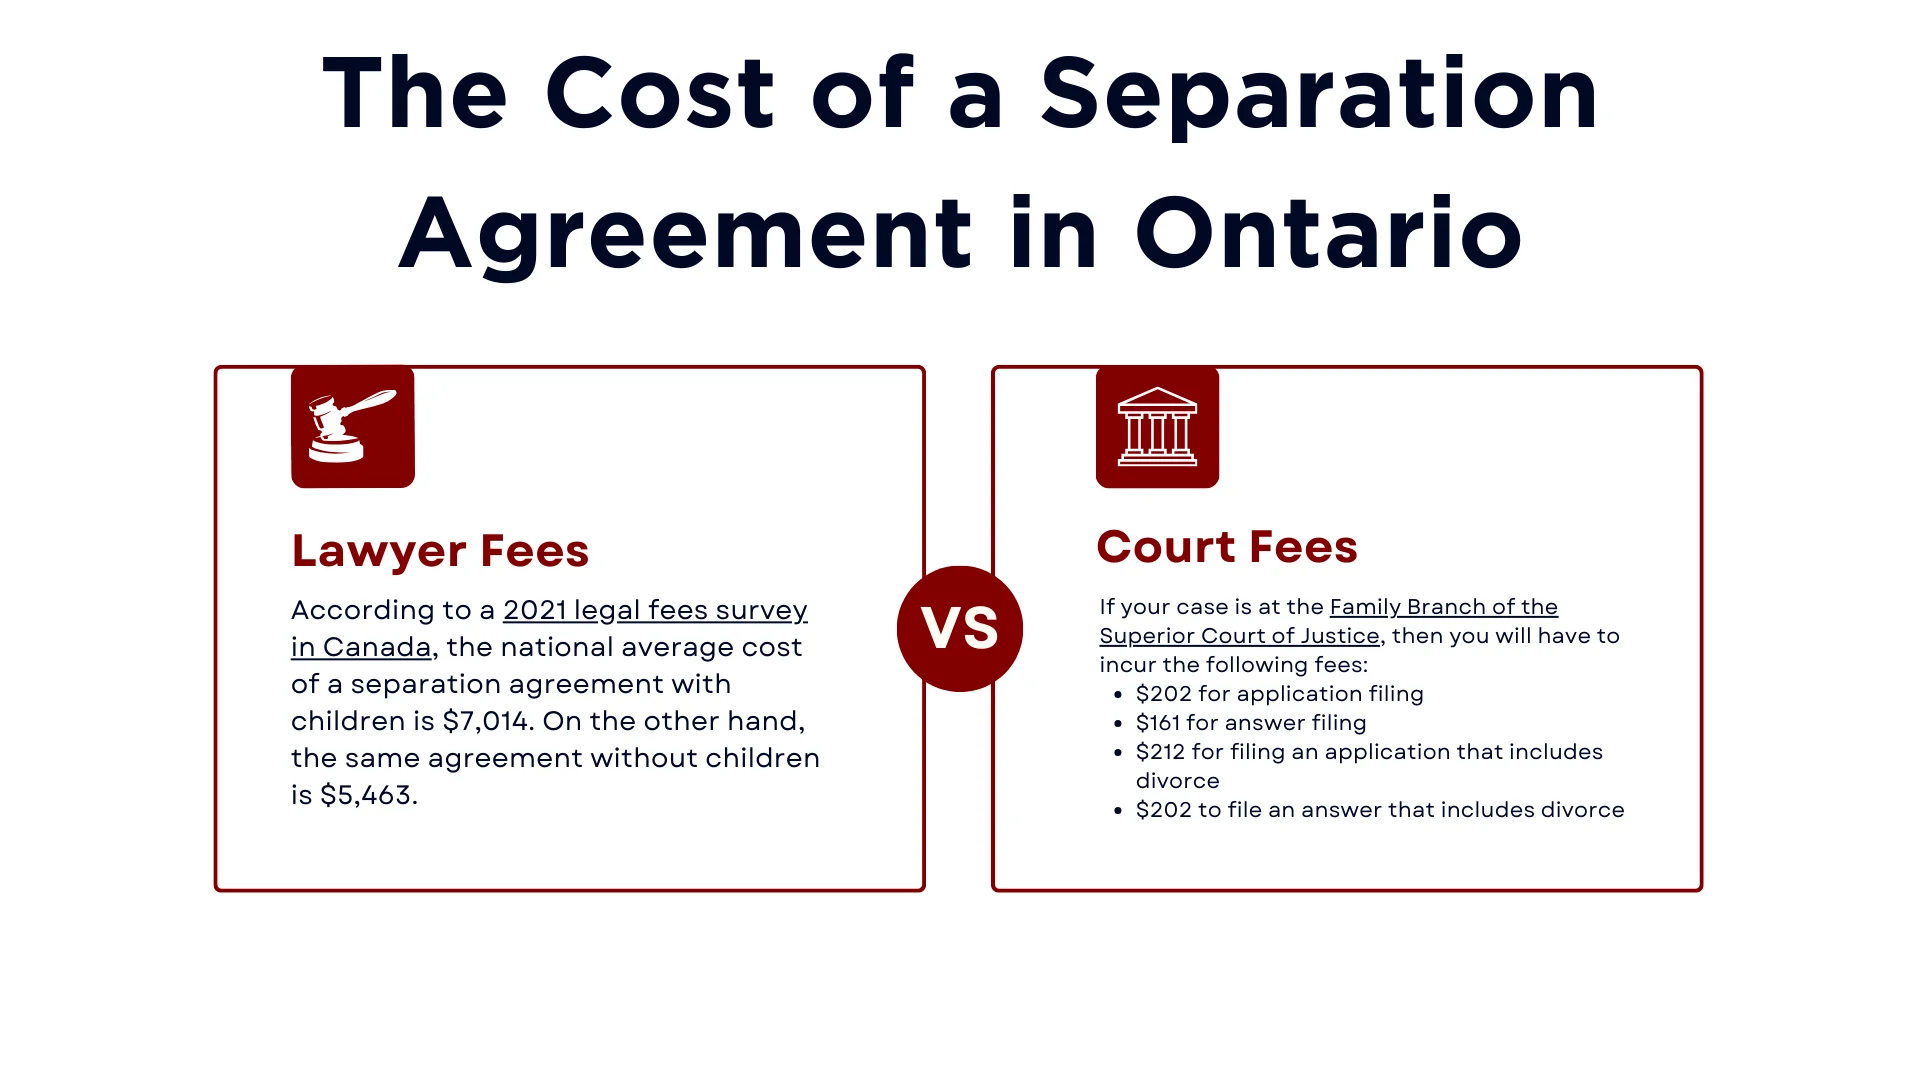 A comparison table of the cost of a separation agreement in Ontario